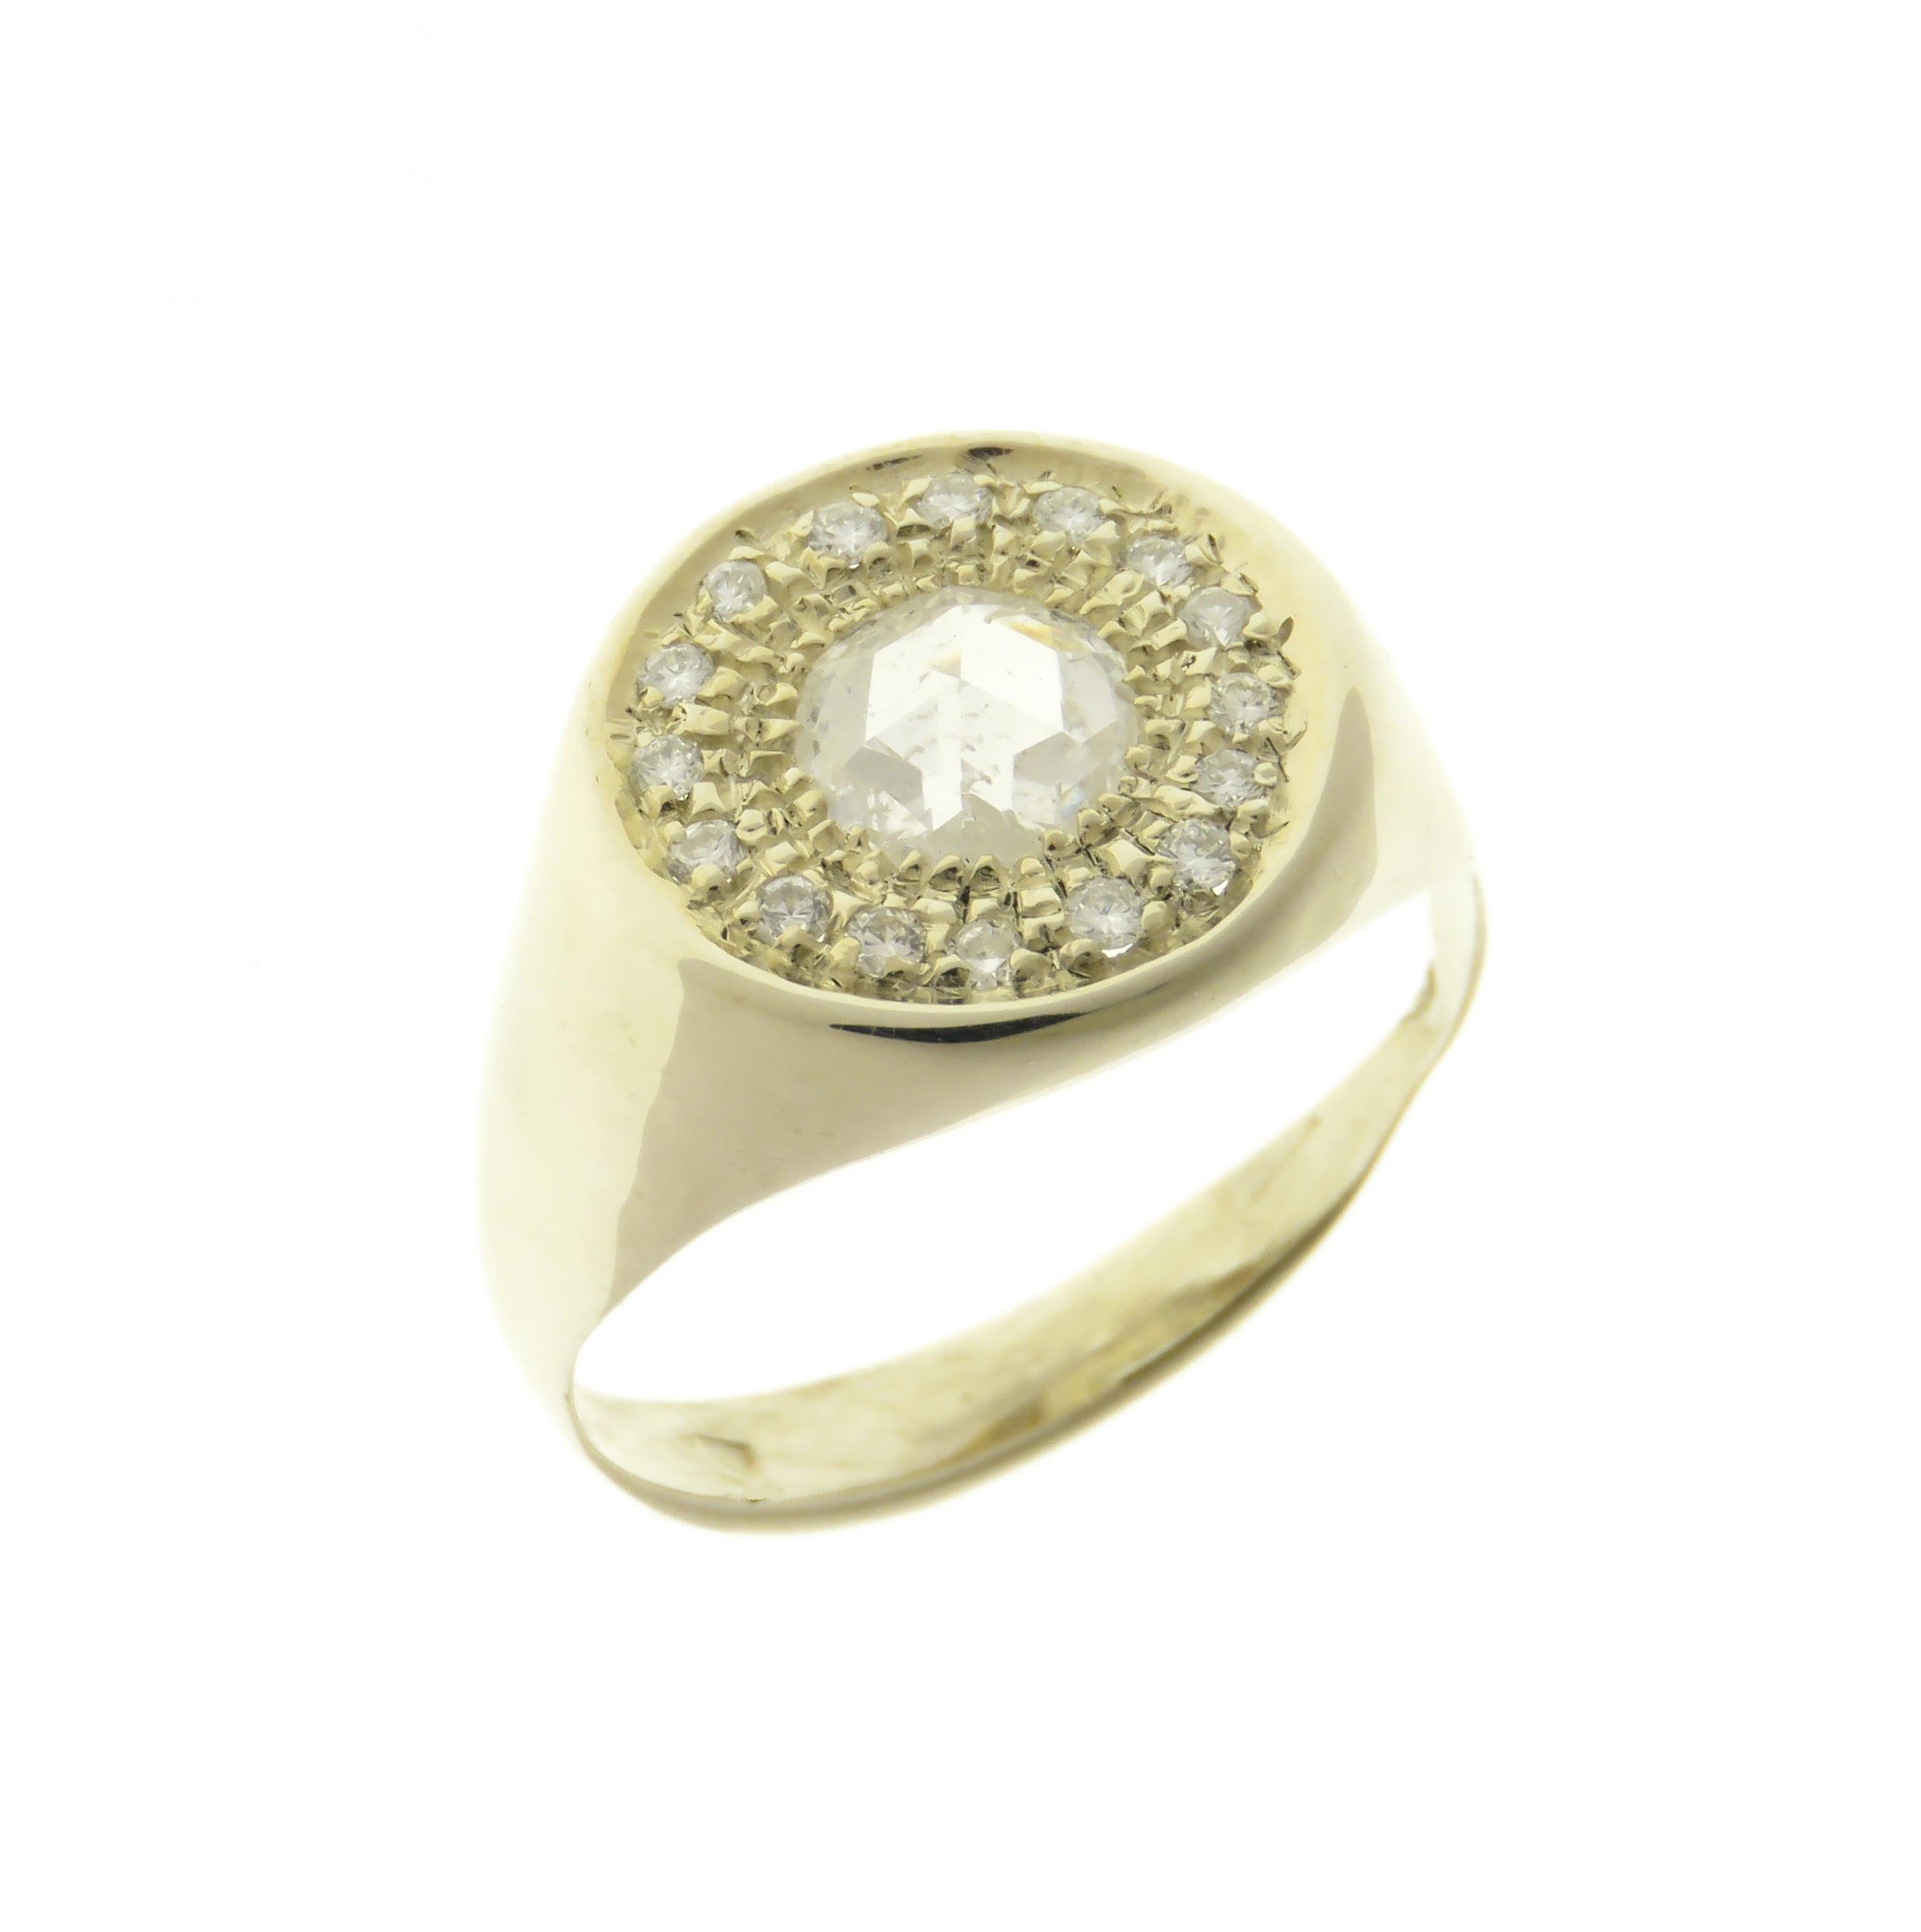 Rose Cut Diamonds Signet 9 Karat White Gold Ring Handcrafted in Italy by Botta Gioielli